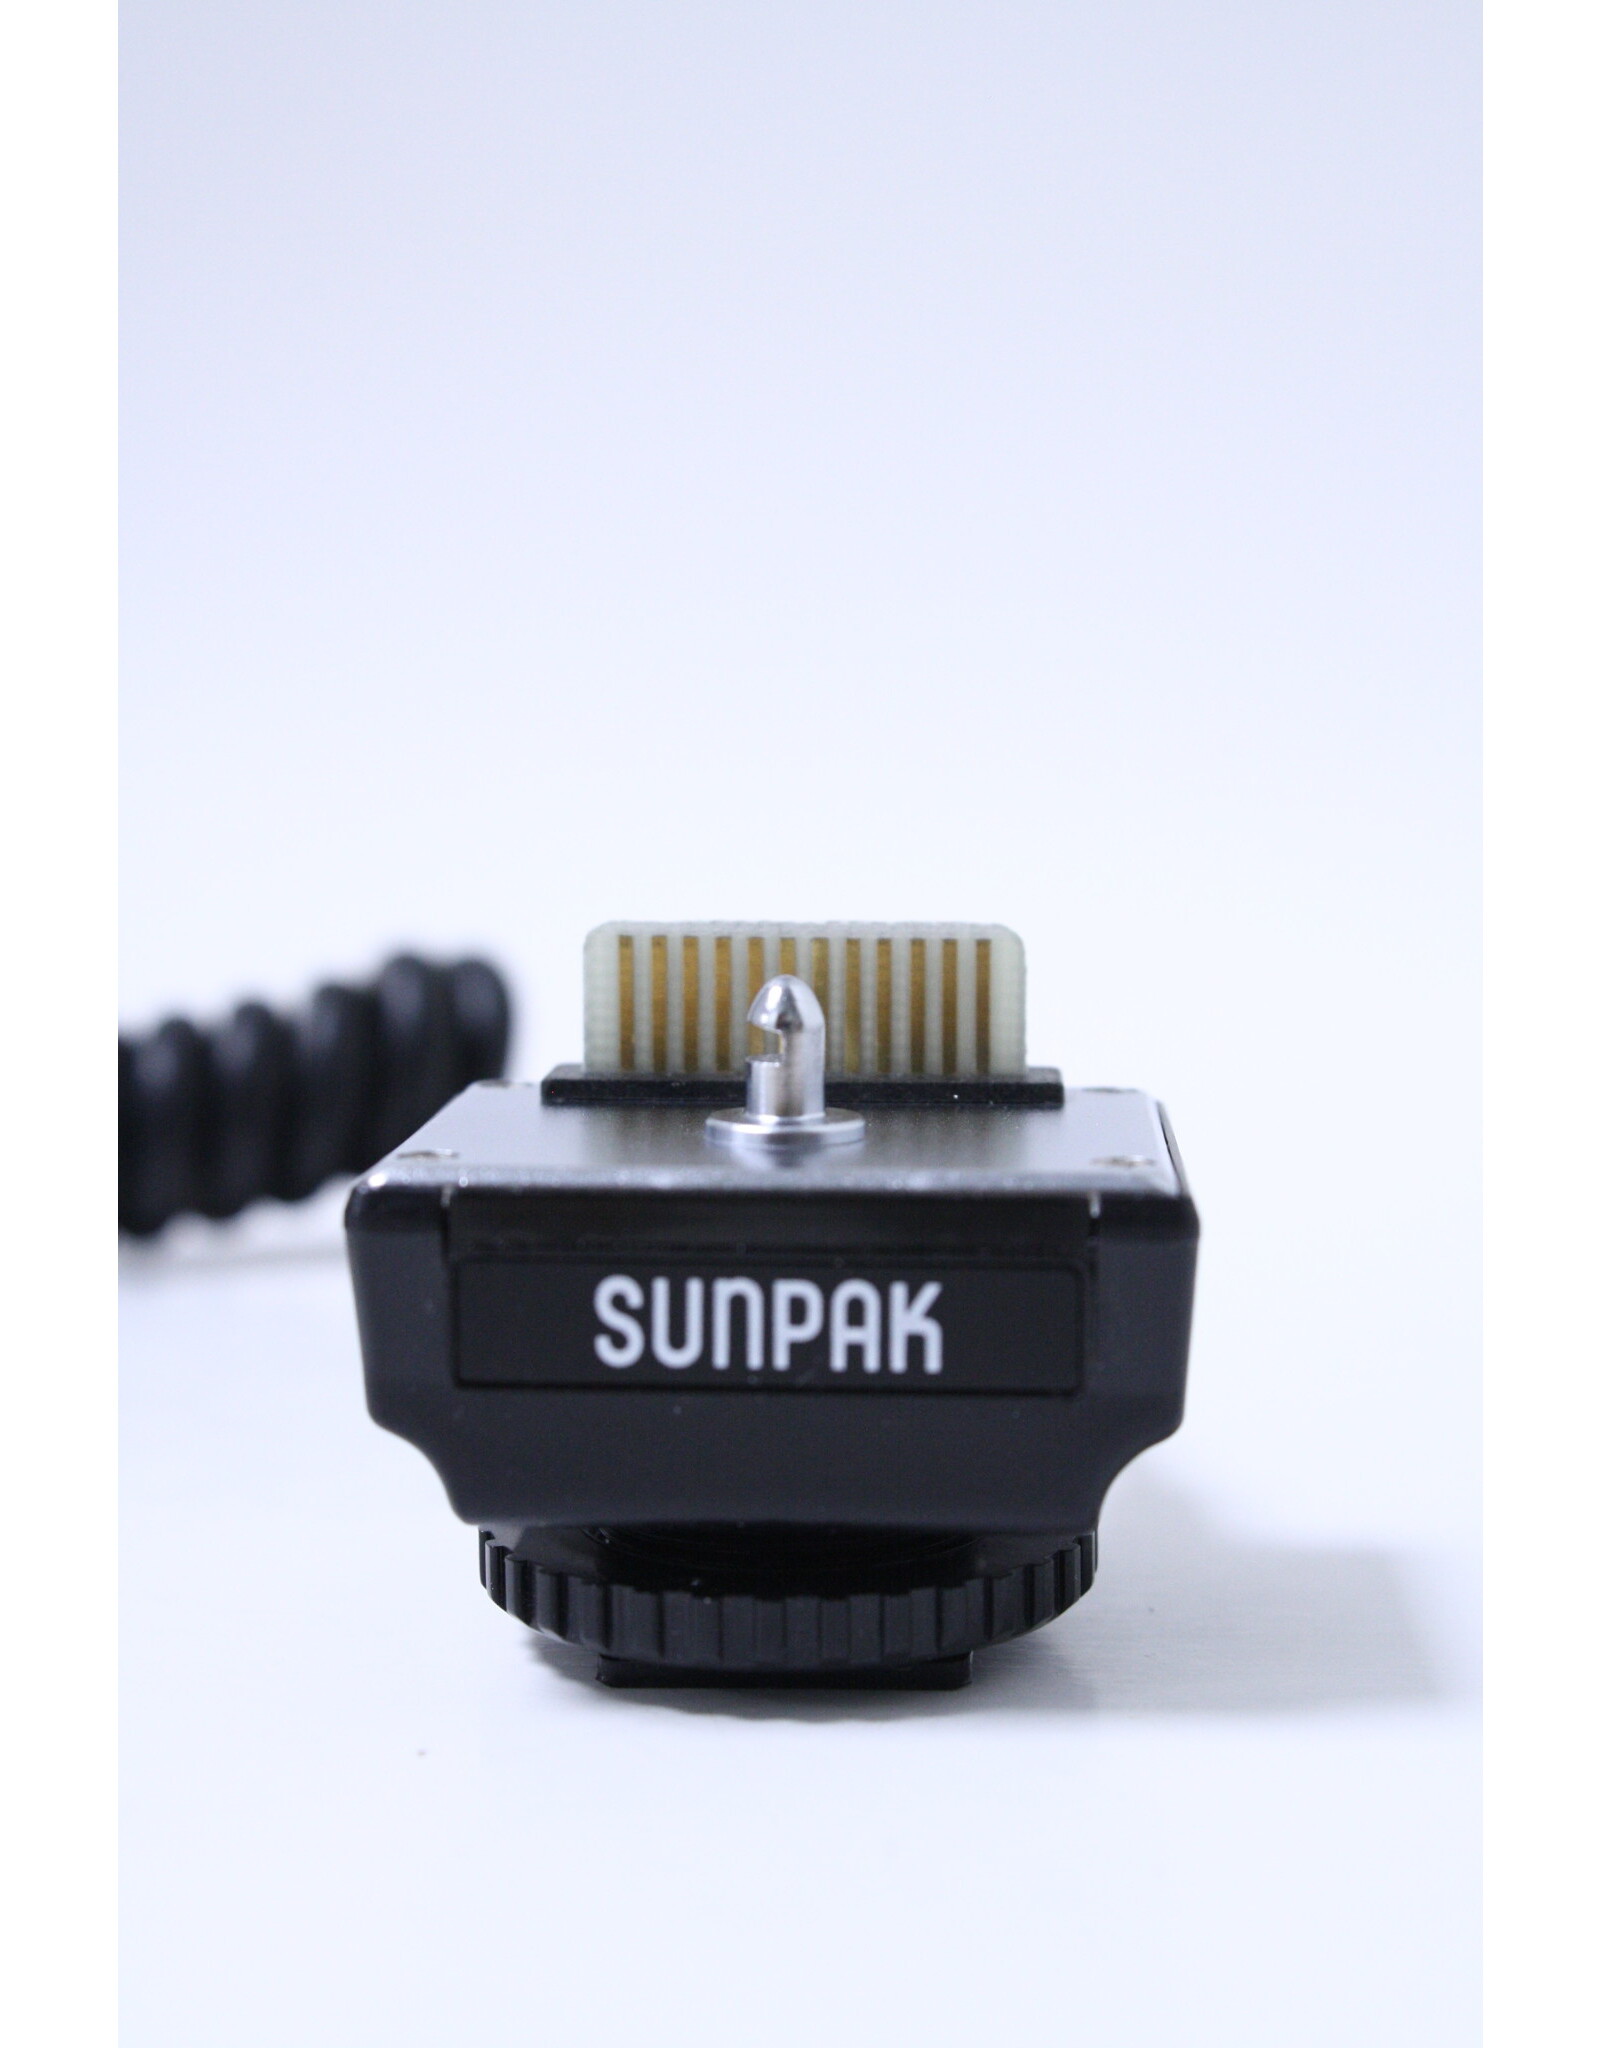 SUNPAK EXT-06 Dedicated System Shoe Module for CANON Series only GOOD CONDITION-TESTED!